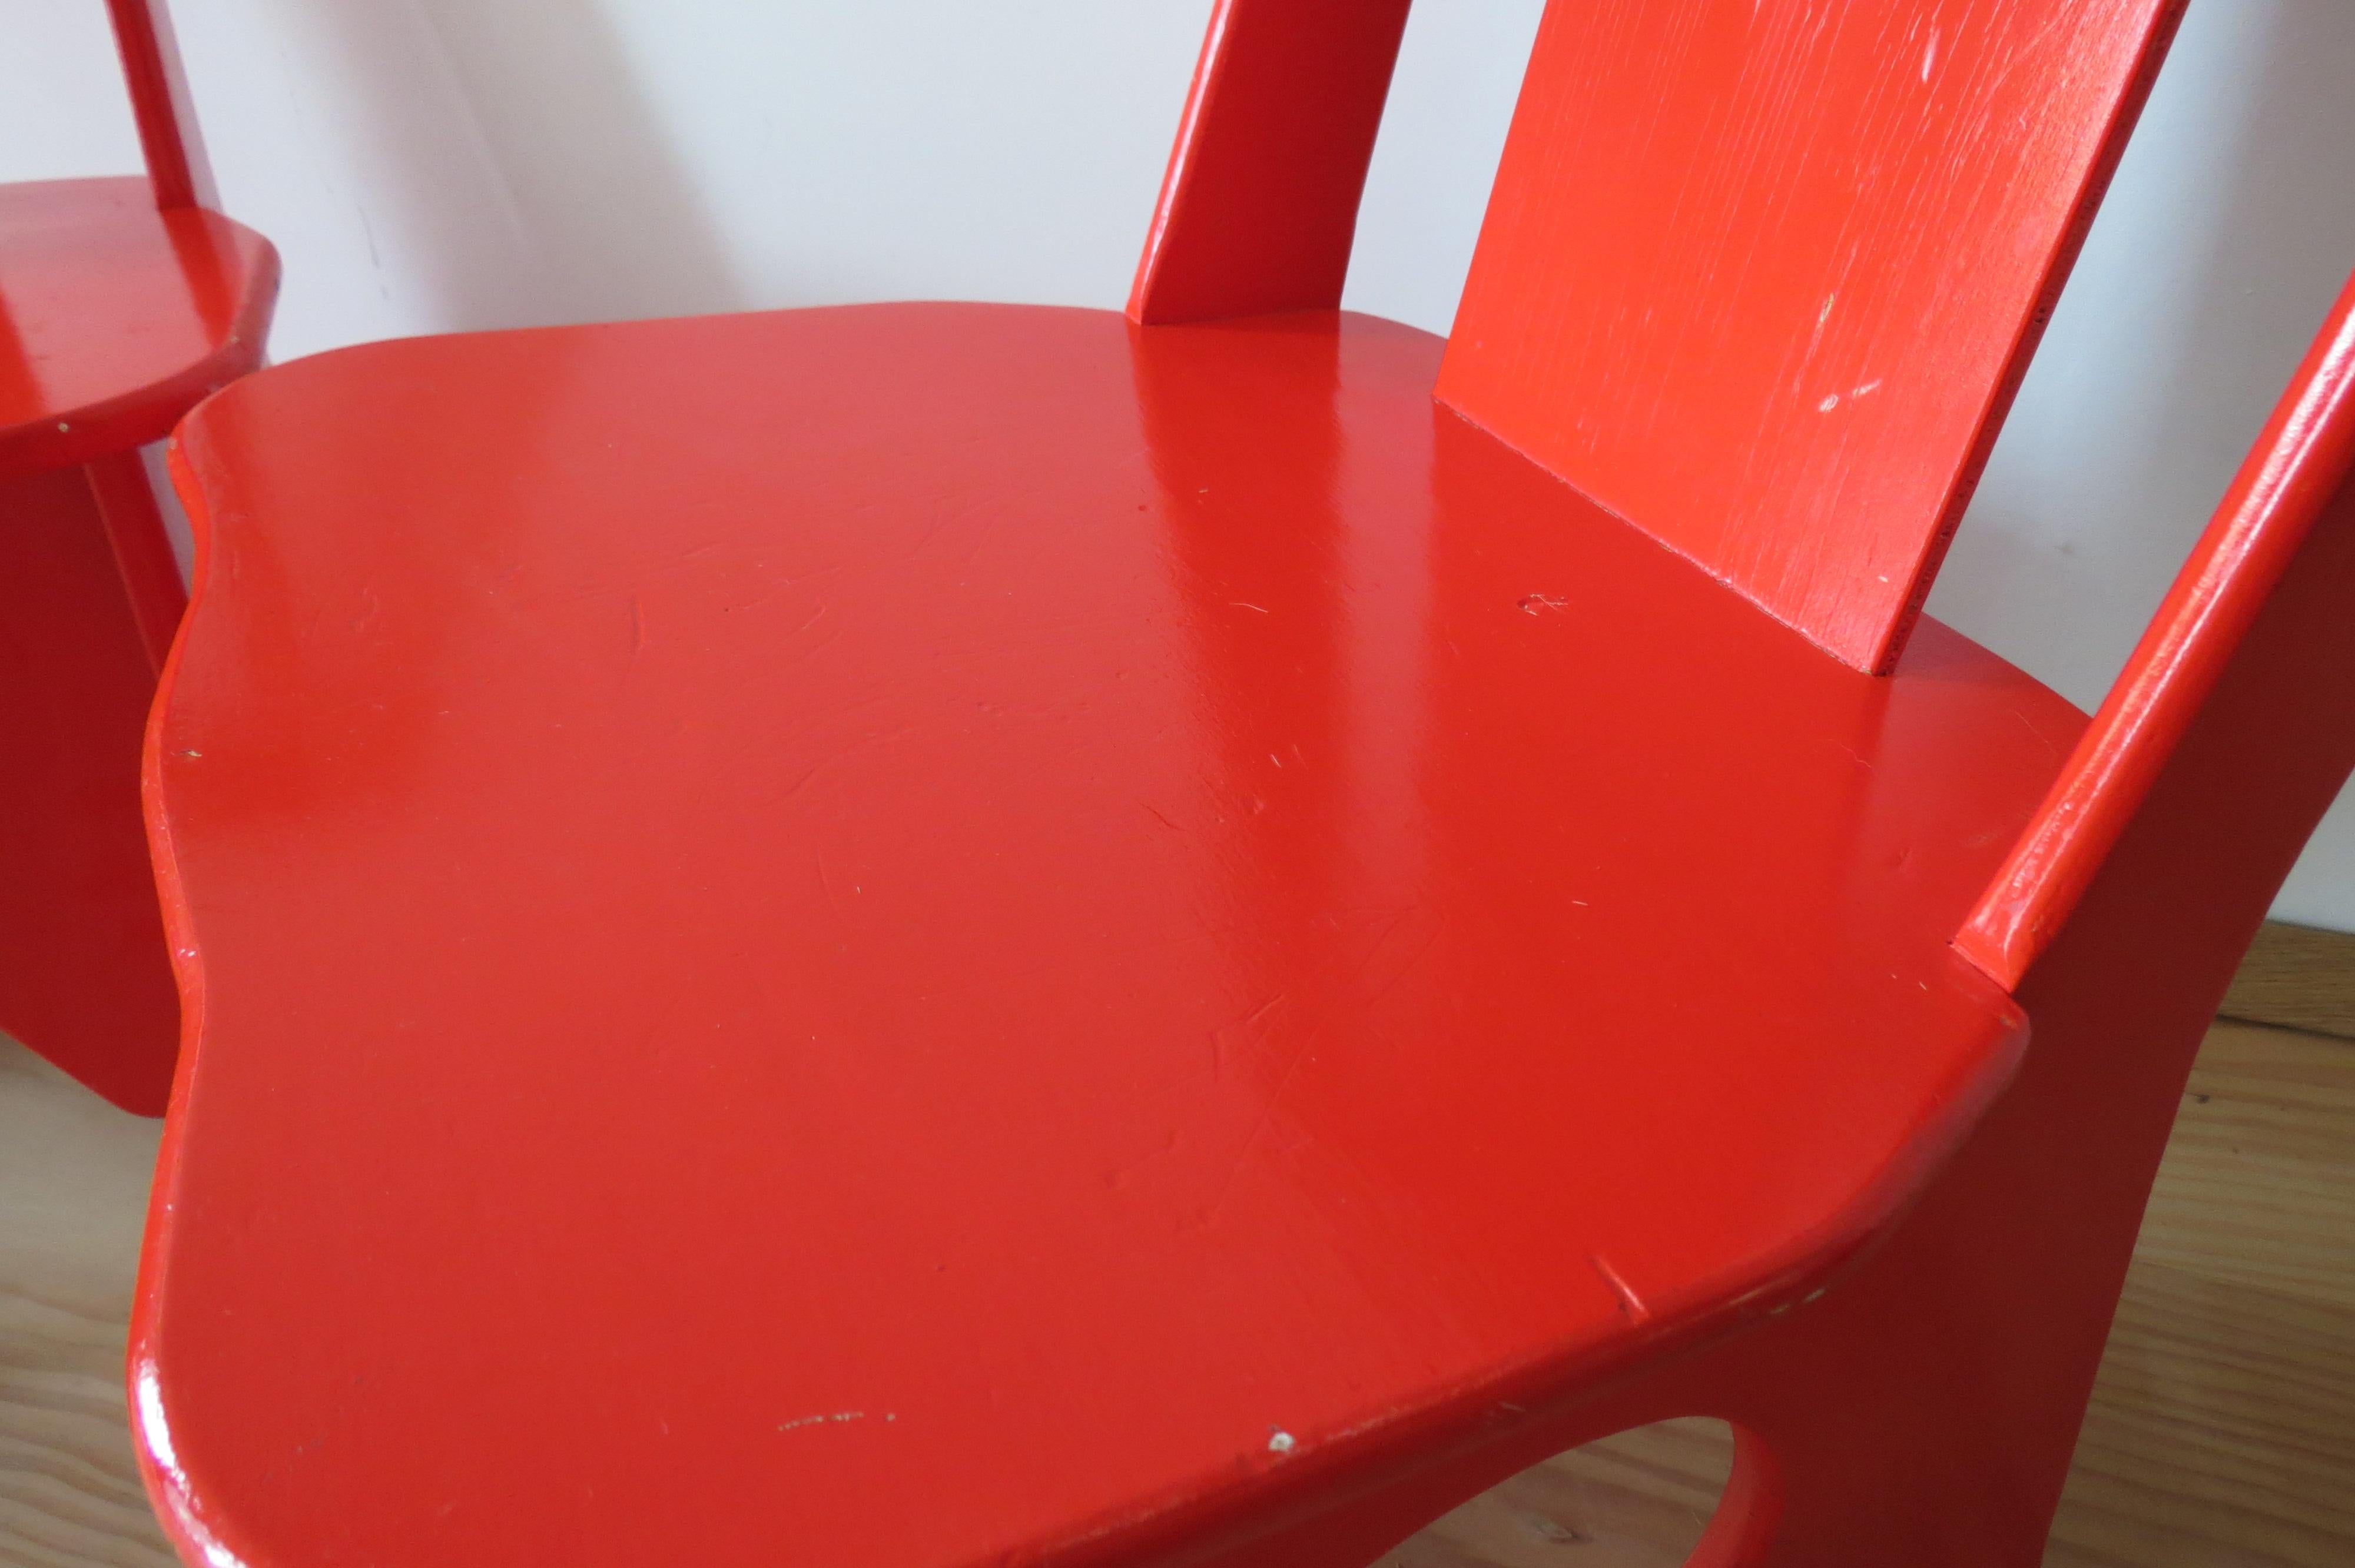 Pair of Original 1960s Red Childrens Chairs In Distressed Condition In Stow on the Wold, GB